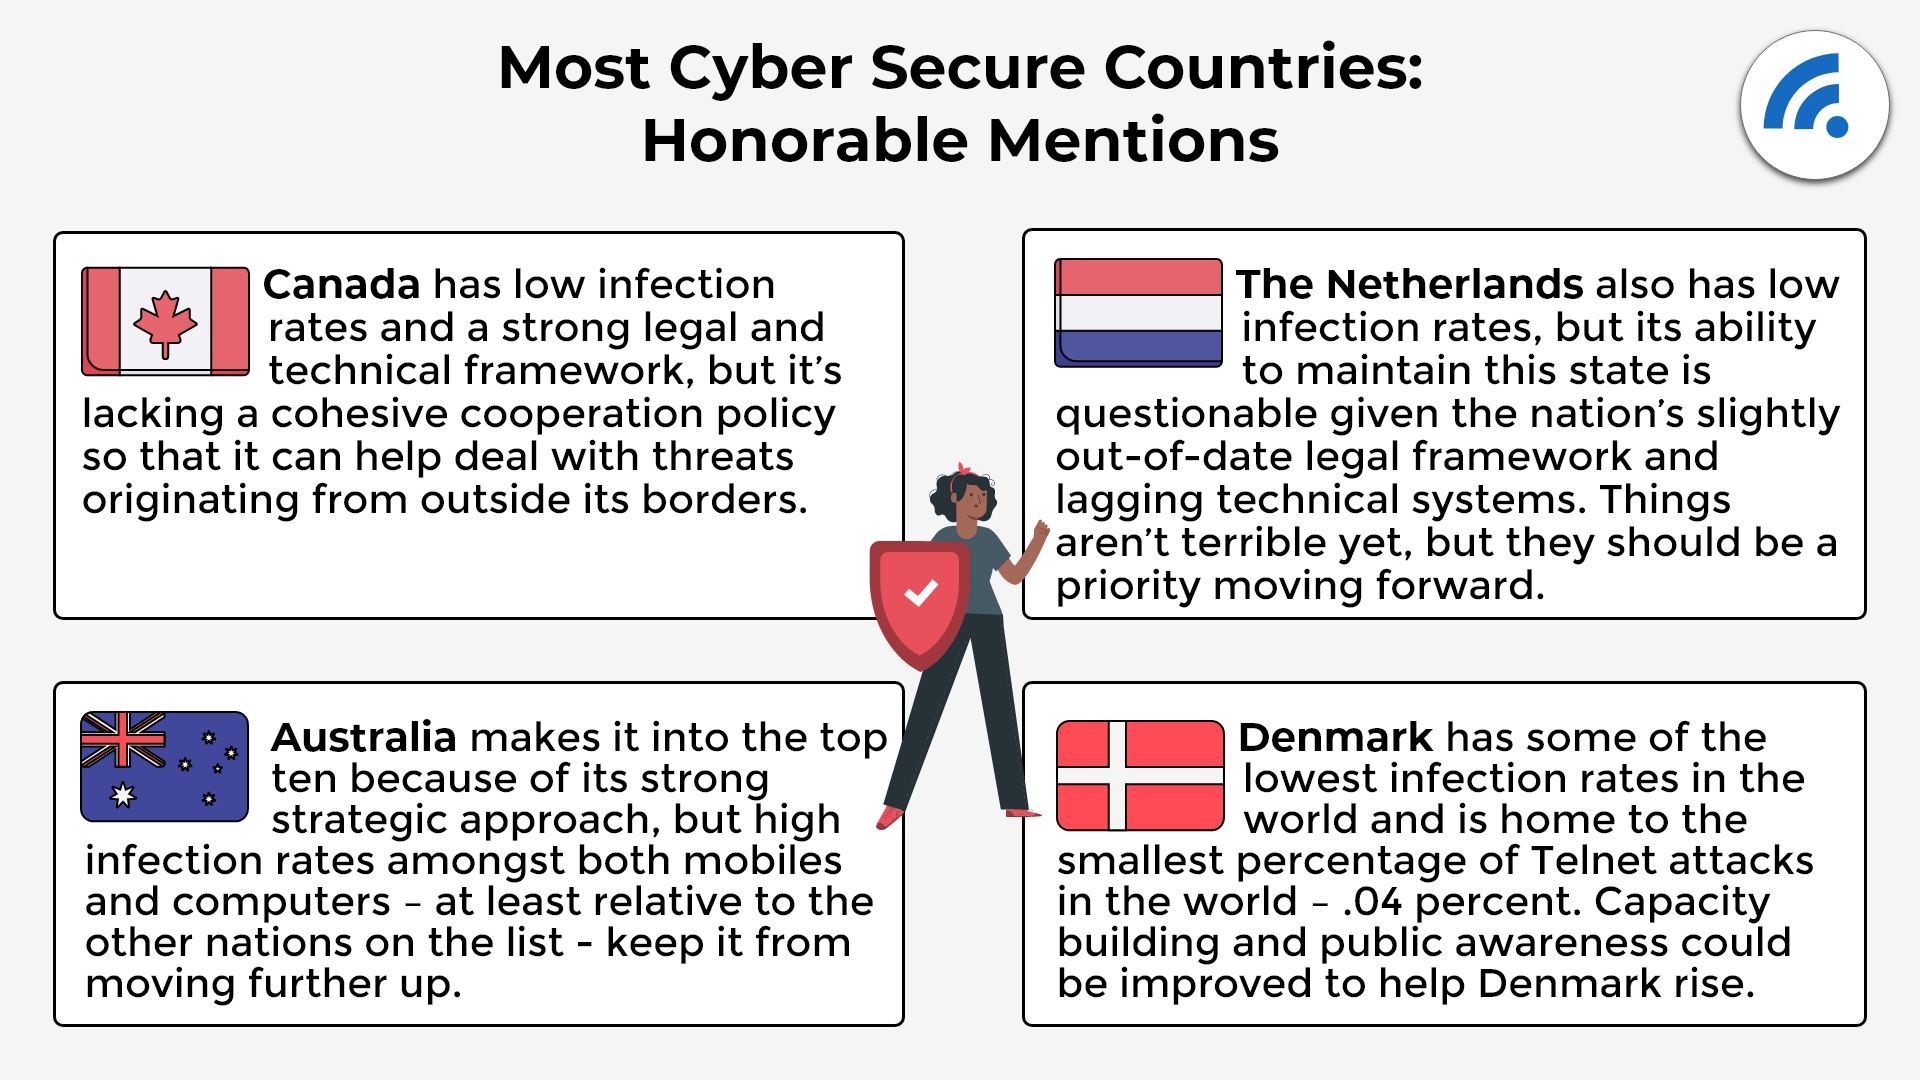 Most Cybersecure Countries Honorable Mentions